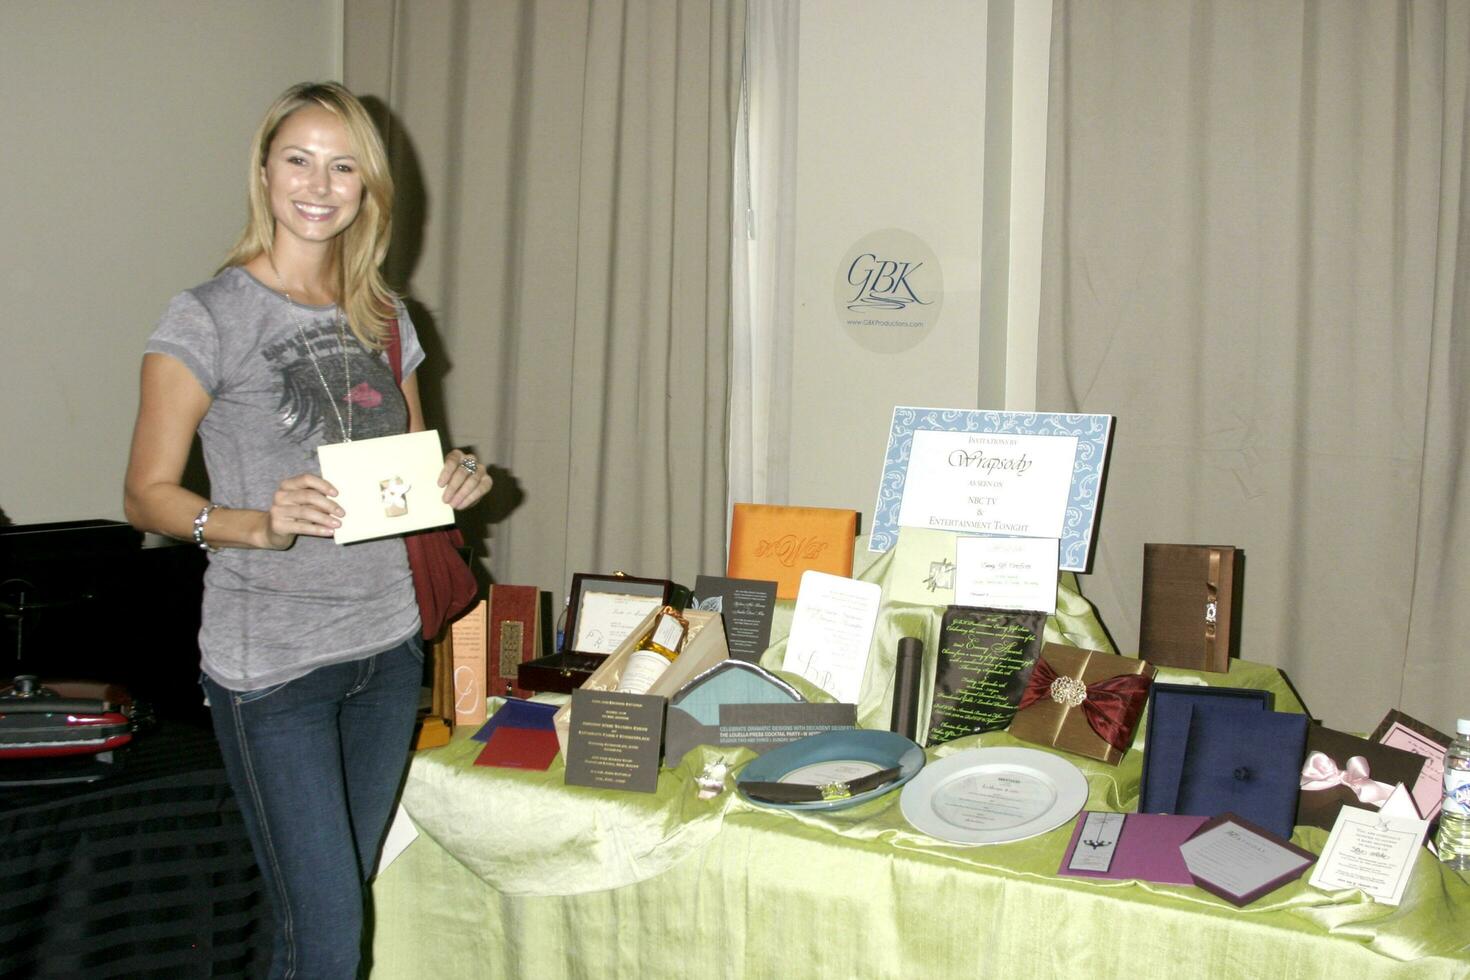 stacy keibler GB emmy regalare suite hollywood roosevelt Hotel los angeles circa settembre 13 2007 2007 kathy hutchin hutchin foto